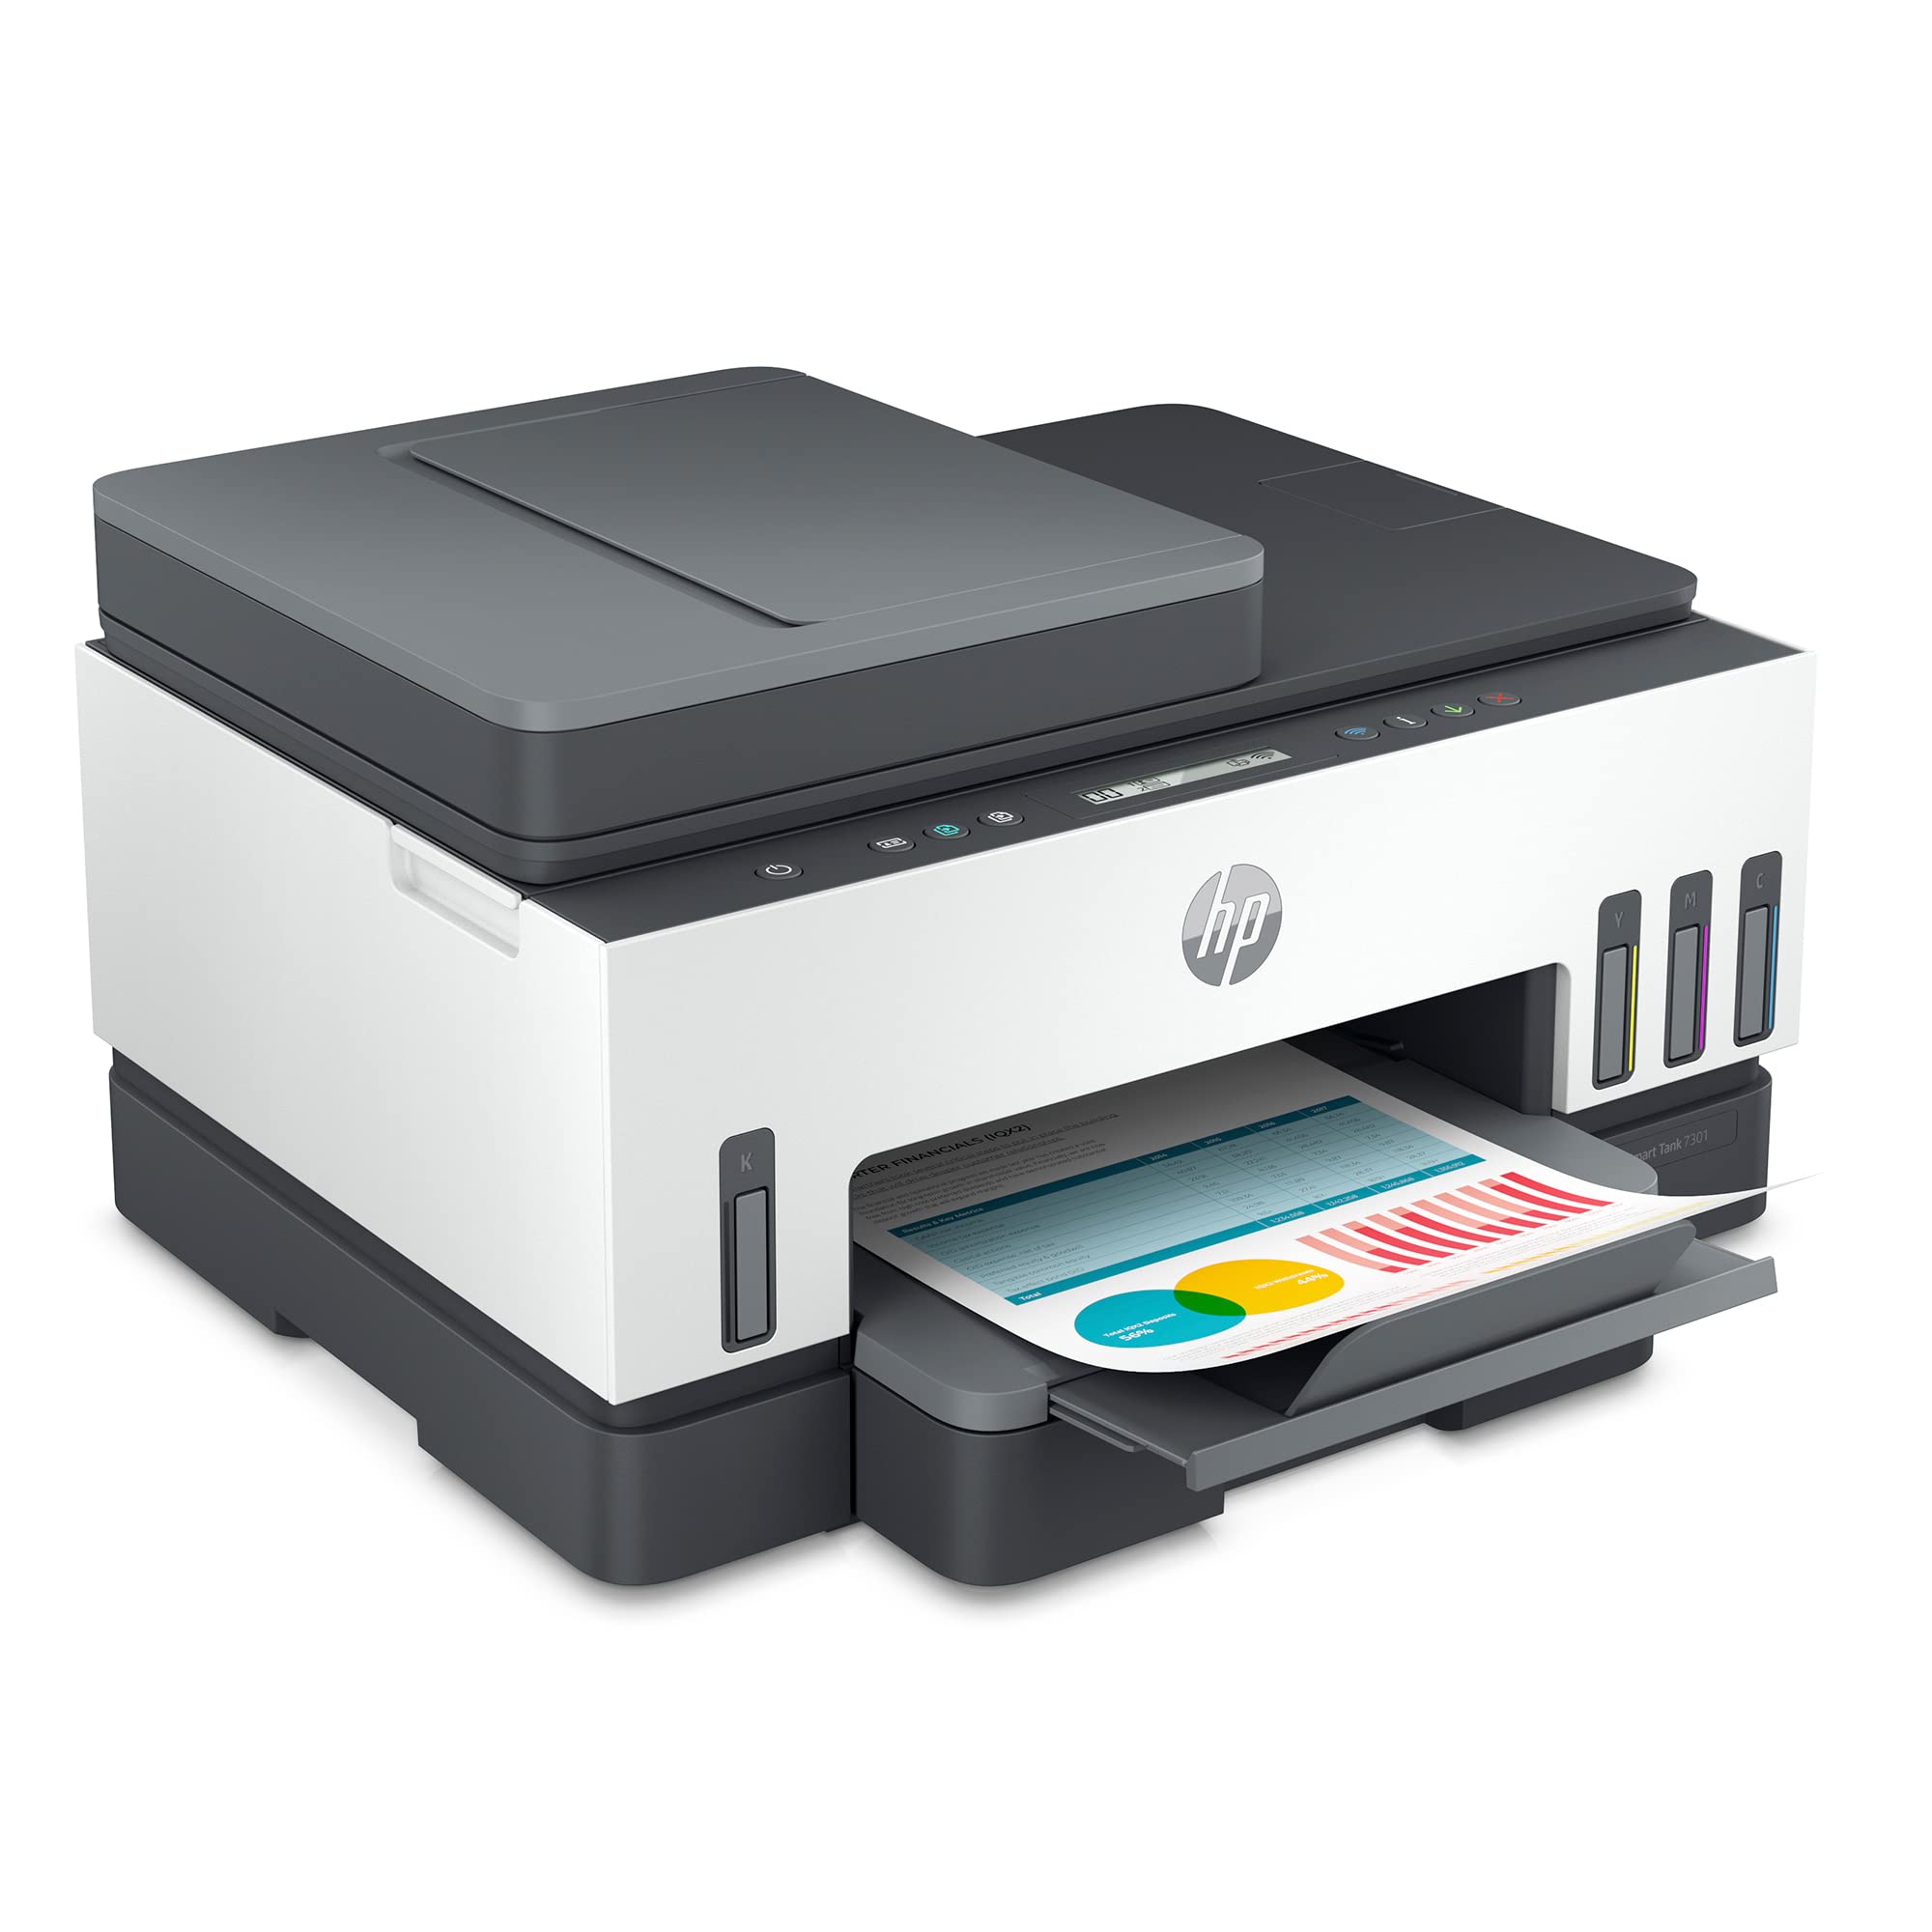 HP Smart -Tank 7301 Wireless All-in-One Cartridge-free Ink Printer, up to 2 years of ink included, mobile print, scan, copy, automatic document feeder (28B70A), Gray